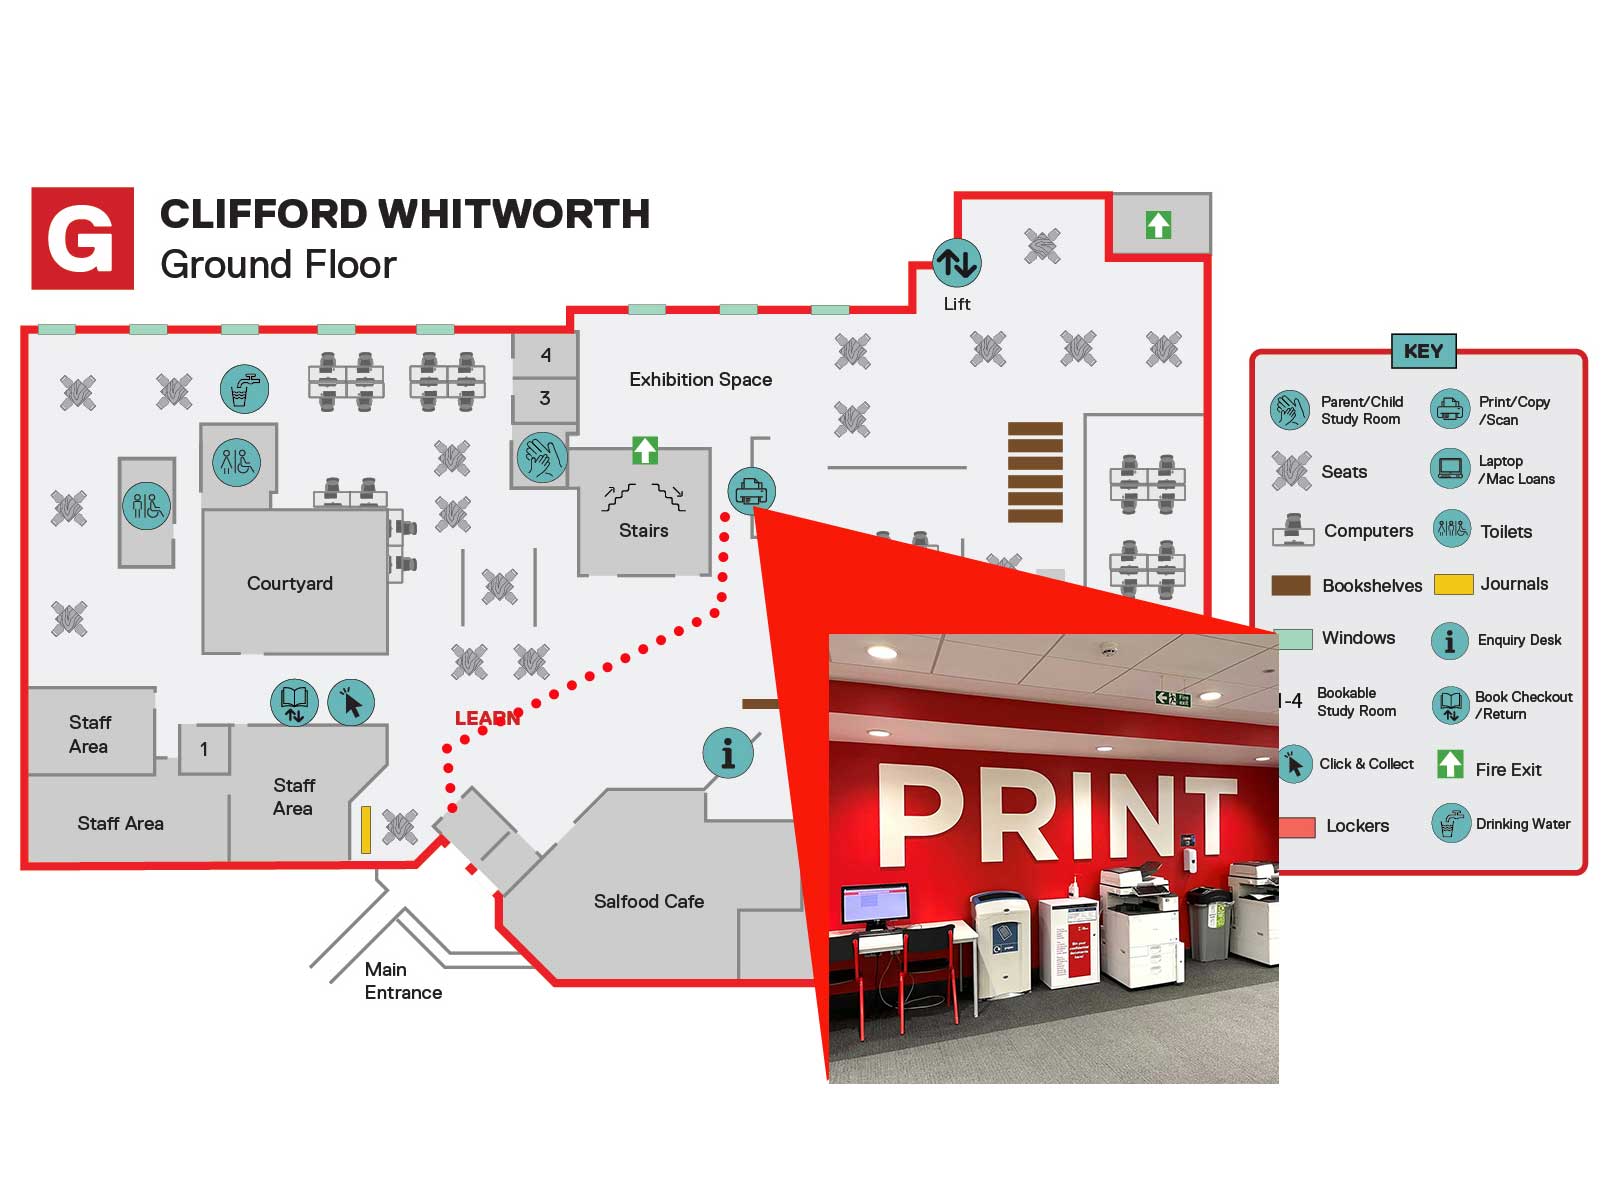 The print area on the ground floor of the Clifford Whitworth Library